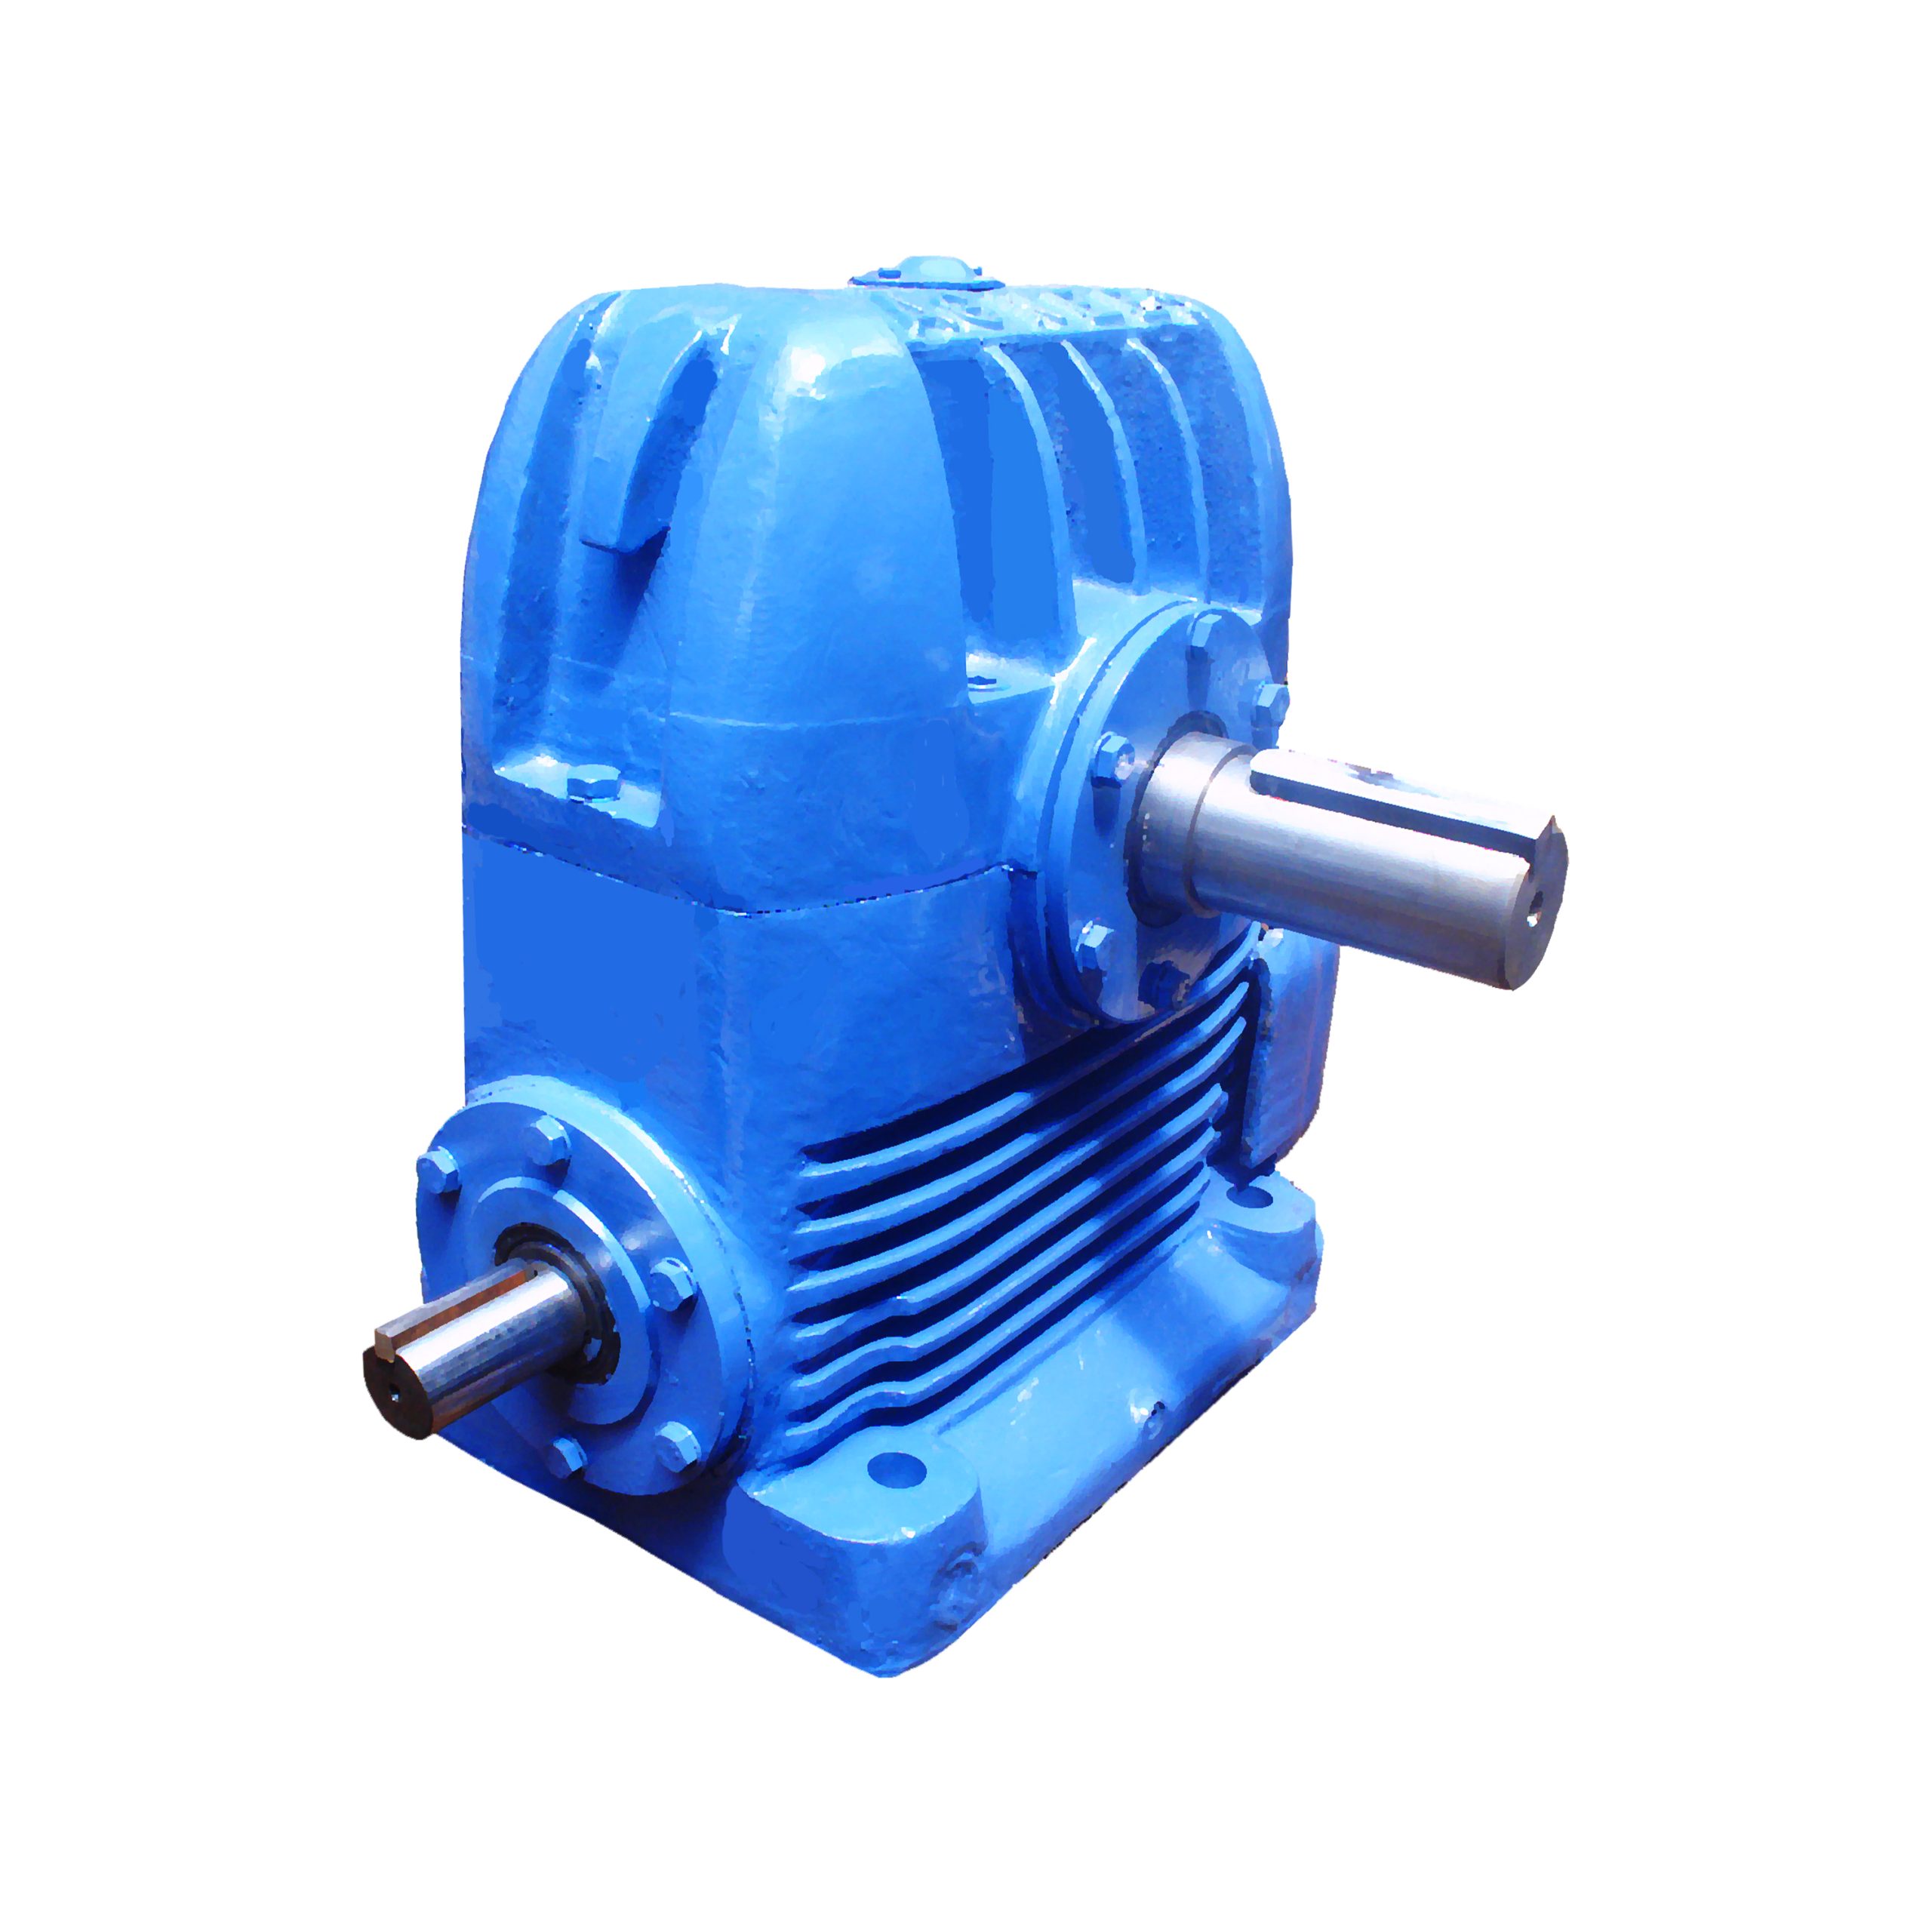 Worm Gear Box, Worm Geared Motor - Manufacturer of Gearboxes 